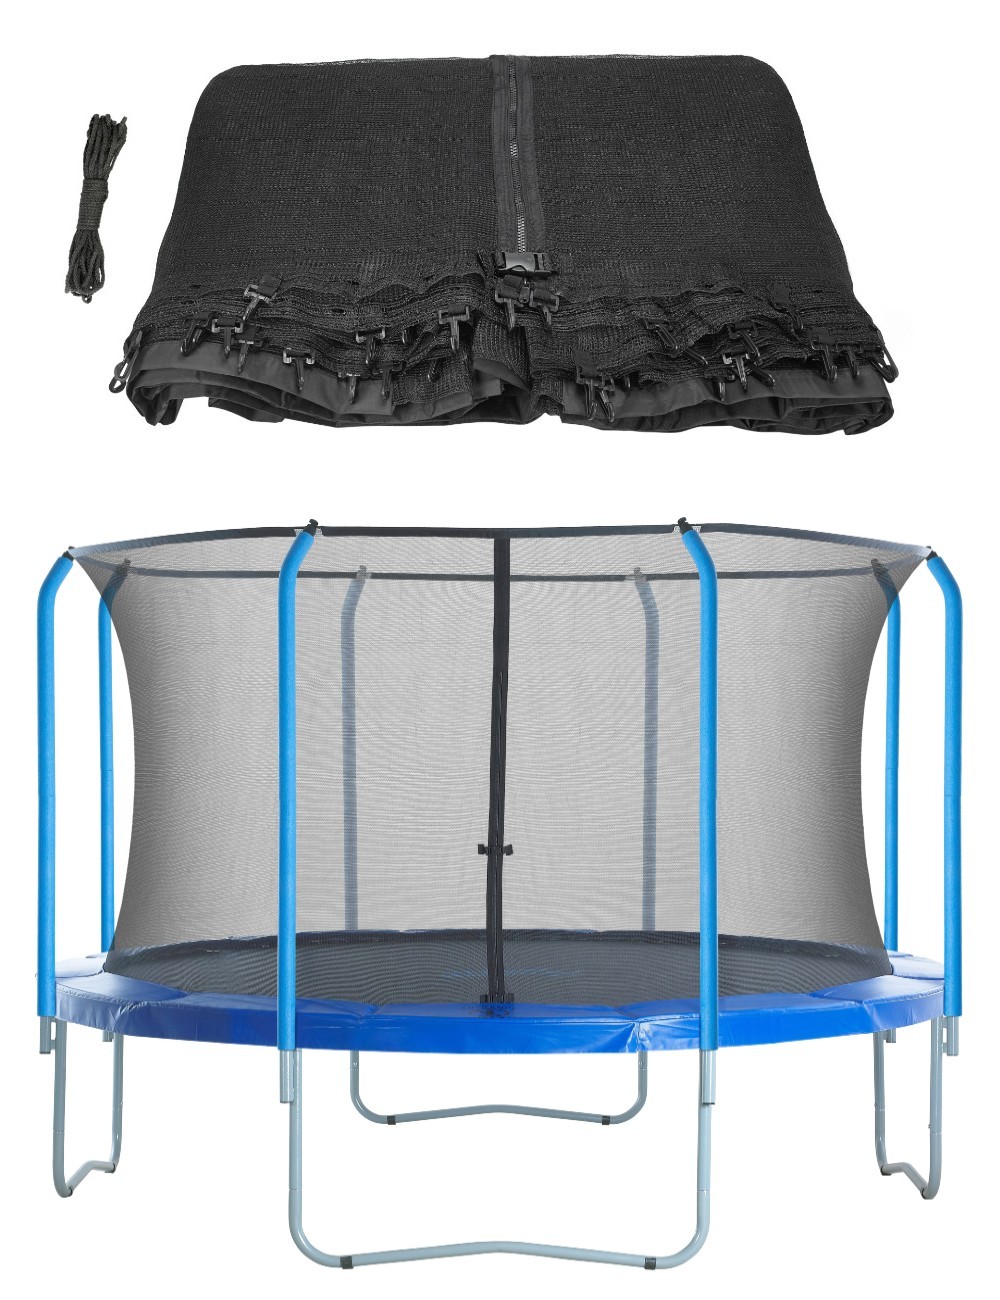 Trampoline Replacement Enclosure Safety Net for 14 ft. Round Frames using 8 Bent Poles and Top Ring - Net Only